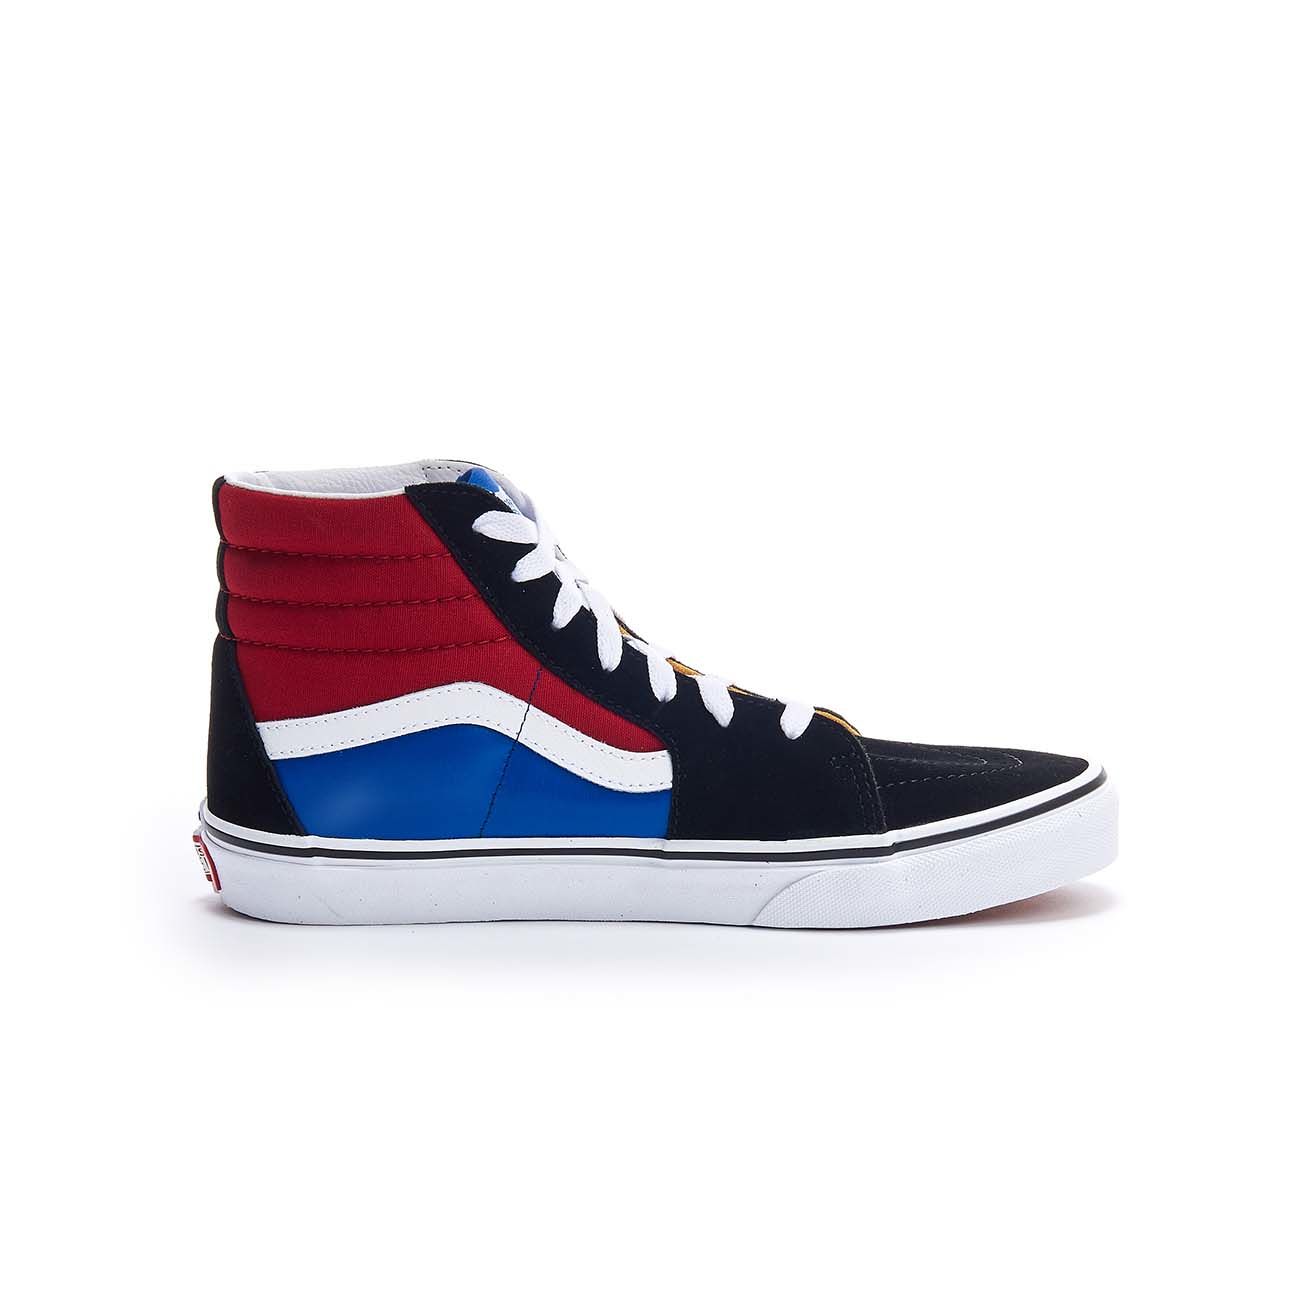 VANS SK8-HI HIGH SNEAKER IN FABRIC AND ECO-LEATHER Kid Black Chilli Pepper  | Mascheroni Store